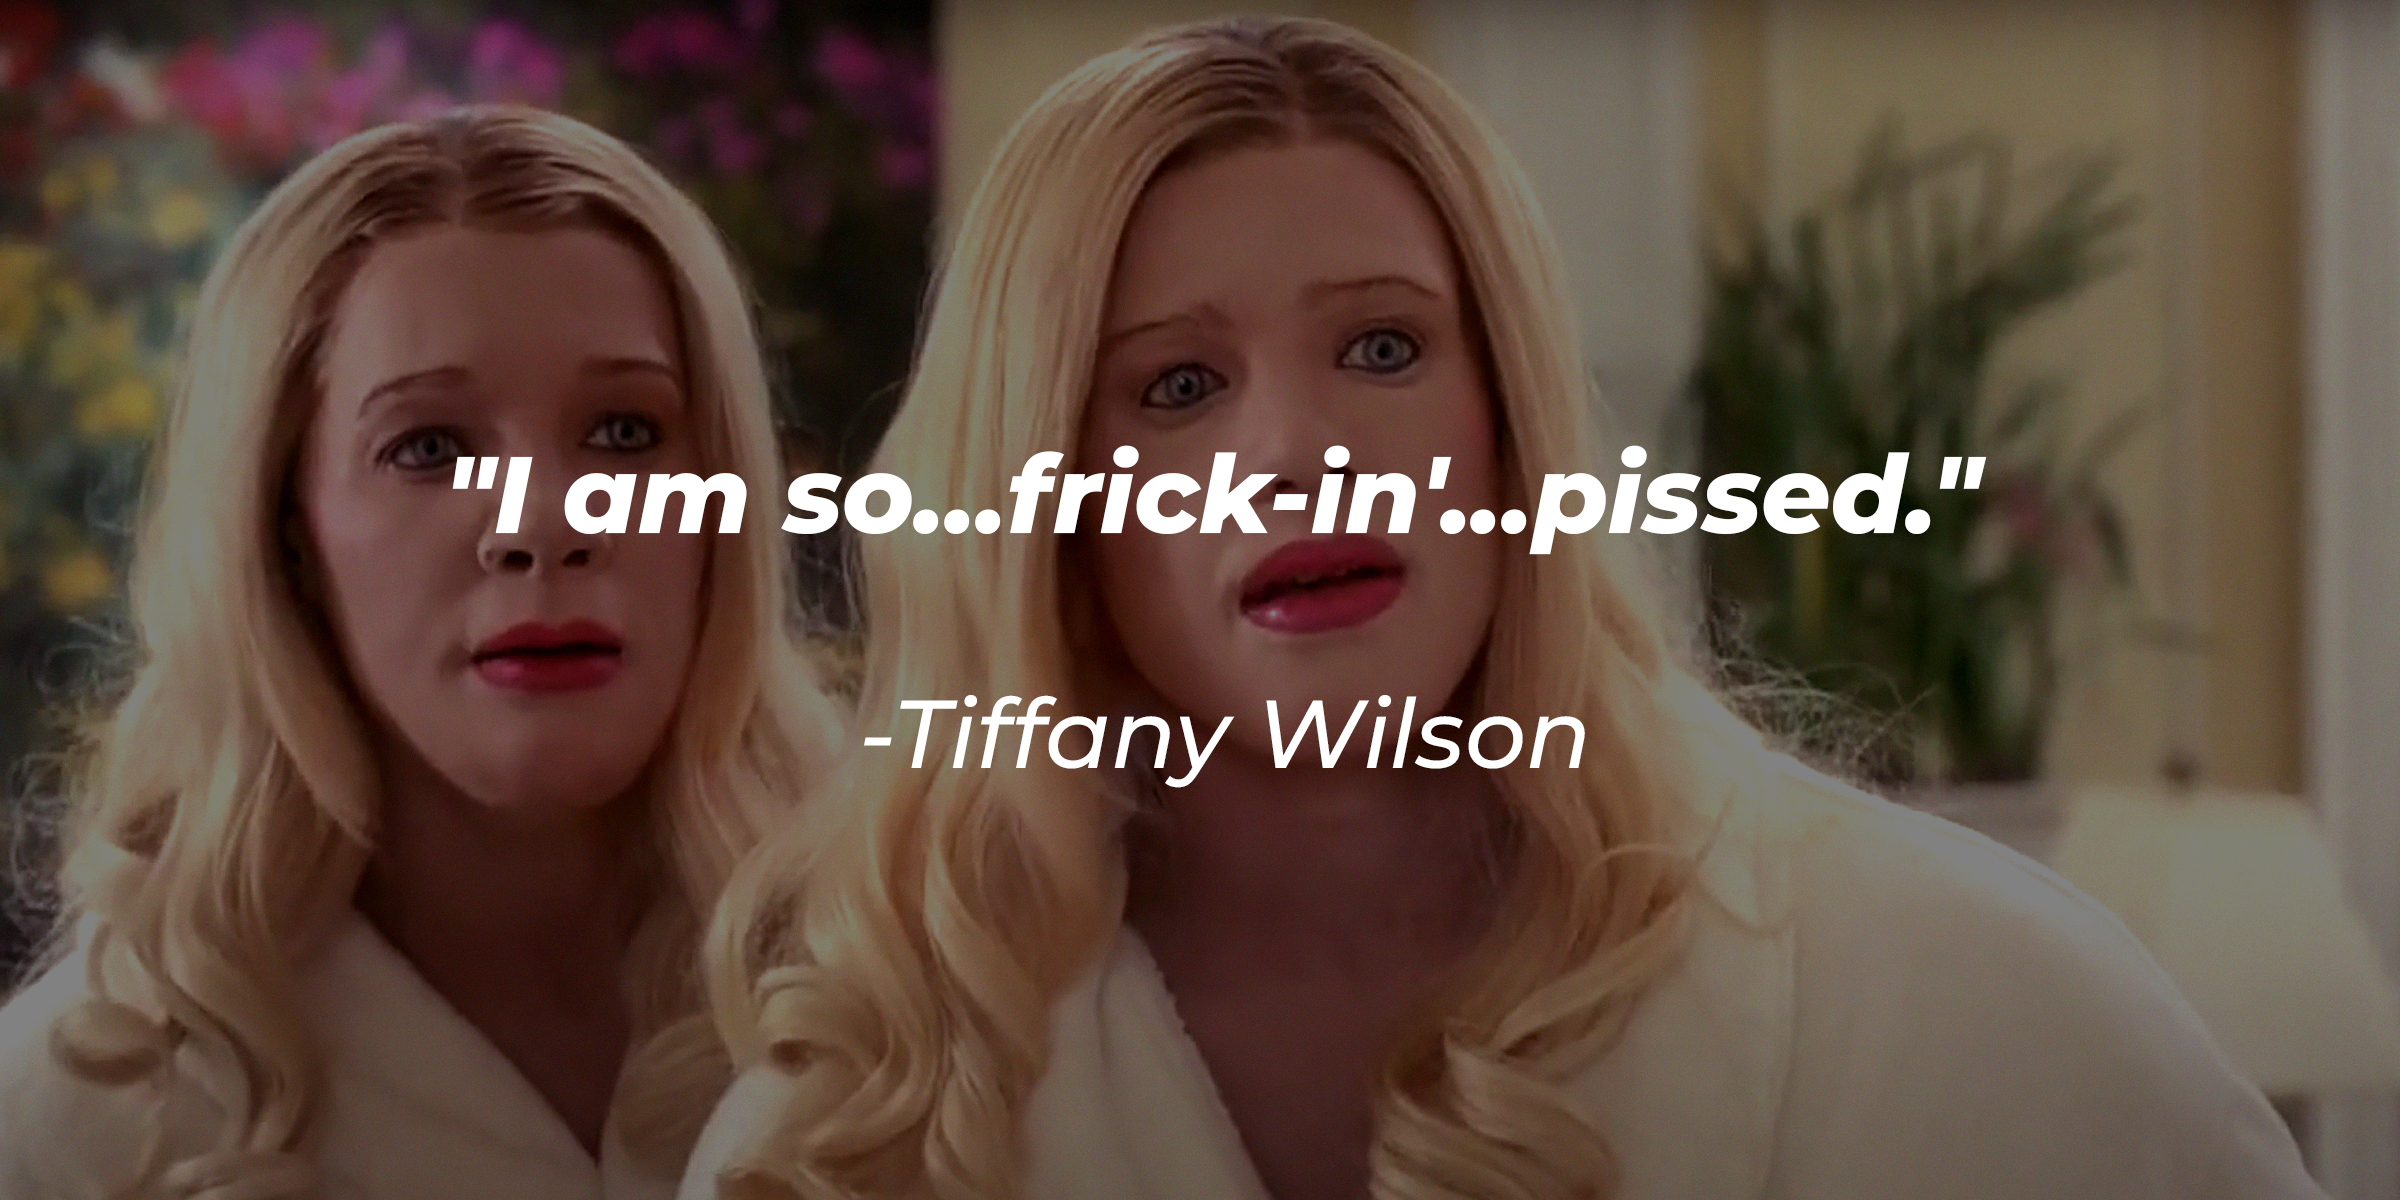 Tiffany Wilson with her quote: " I am so... frick-in...pissed." | Source: youtube.com/Netflix